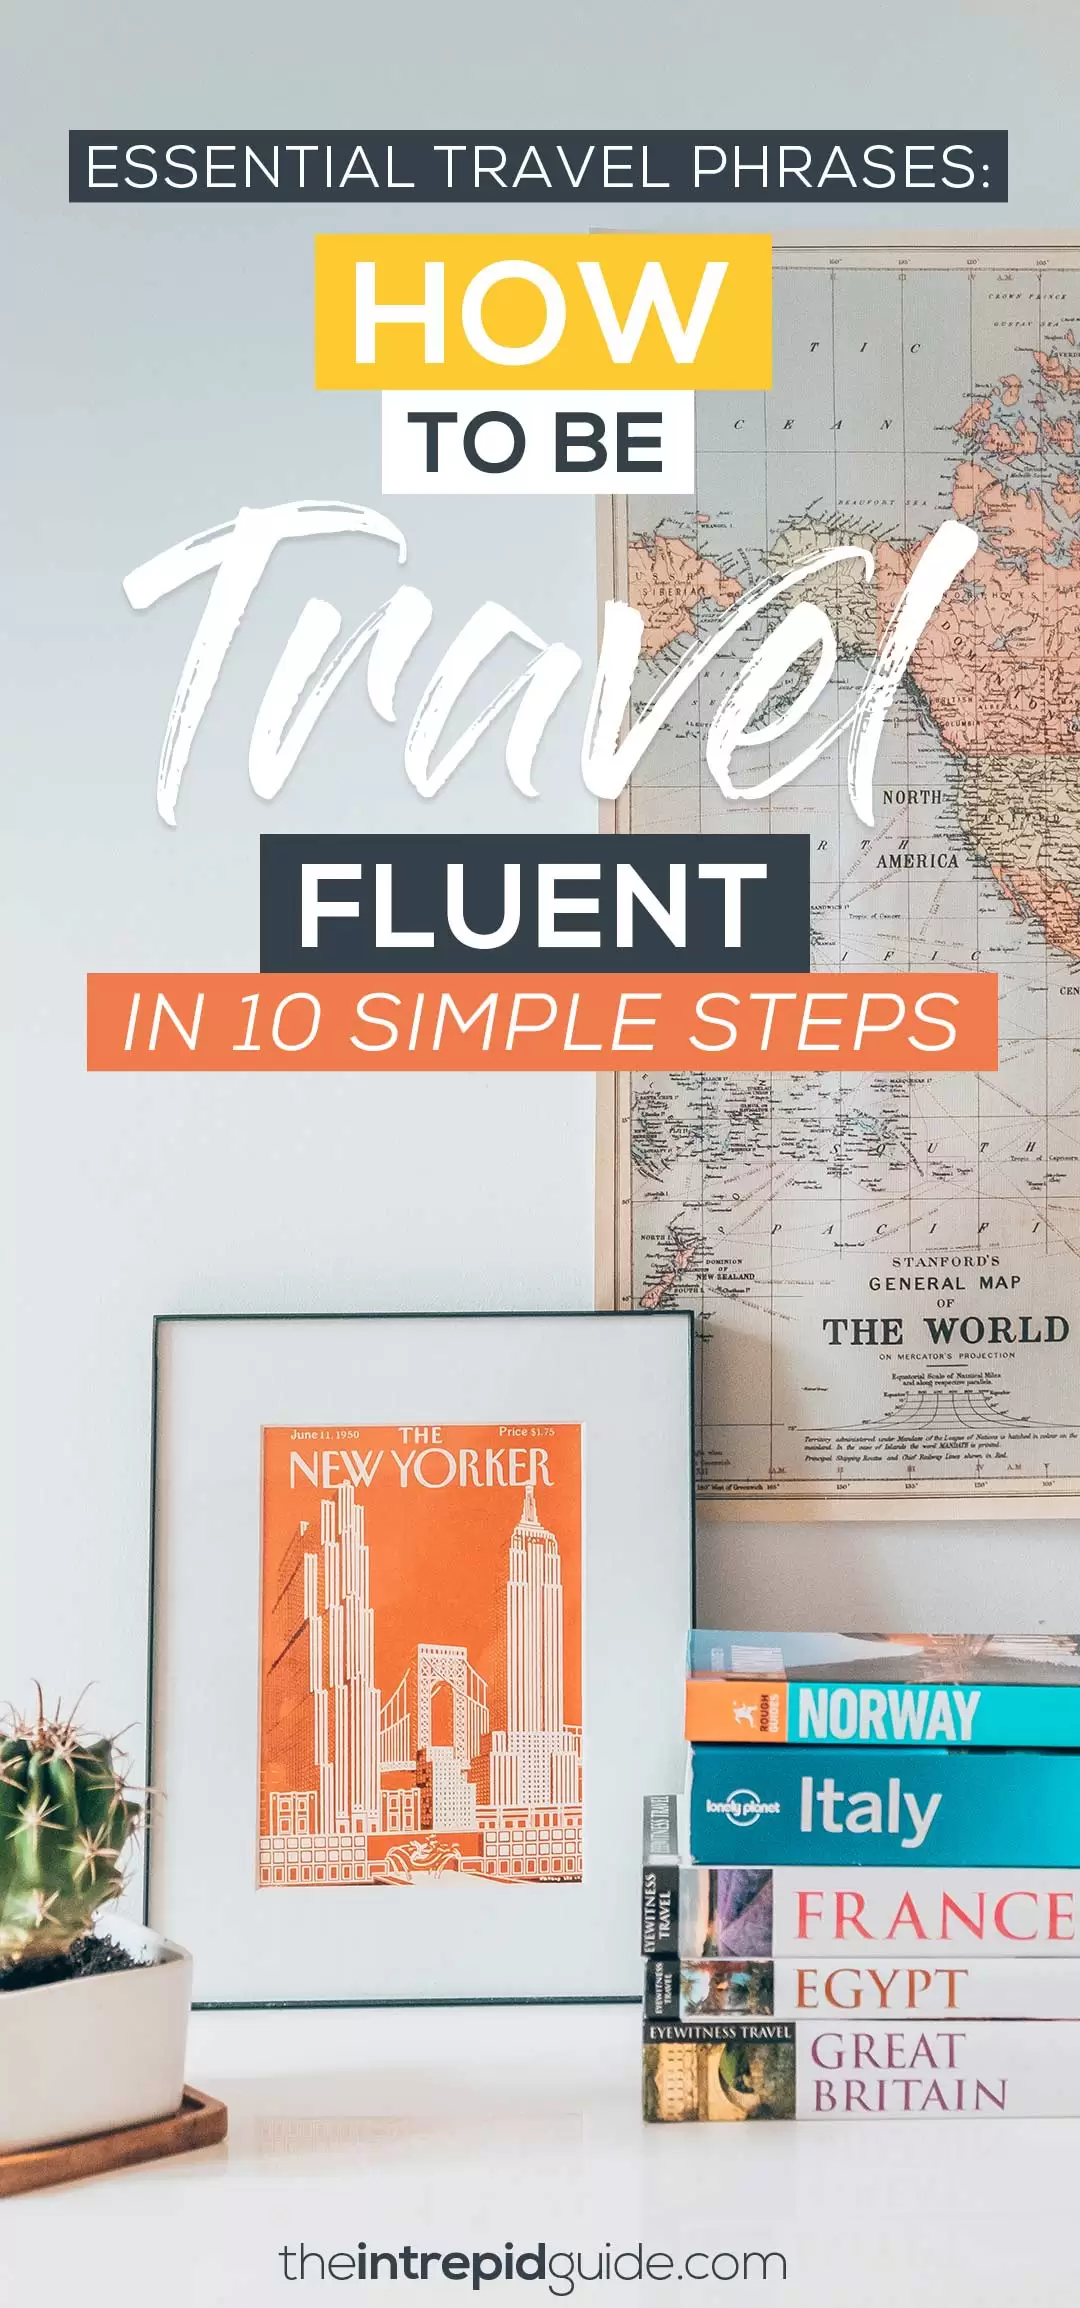 Essential Travel Phrases - How to be Travel Fluent in 10 Steps